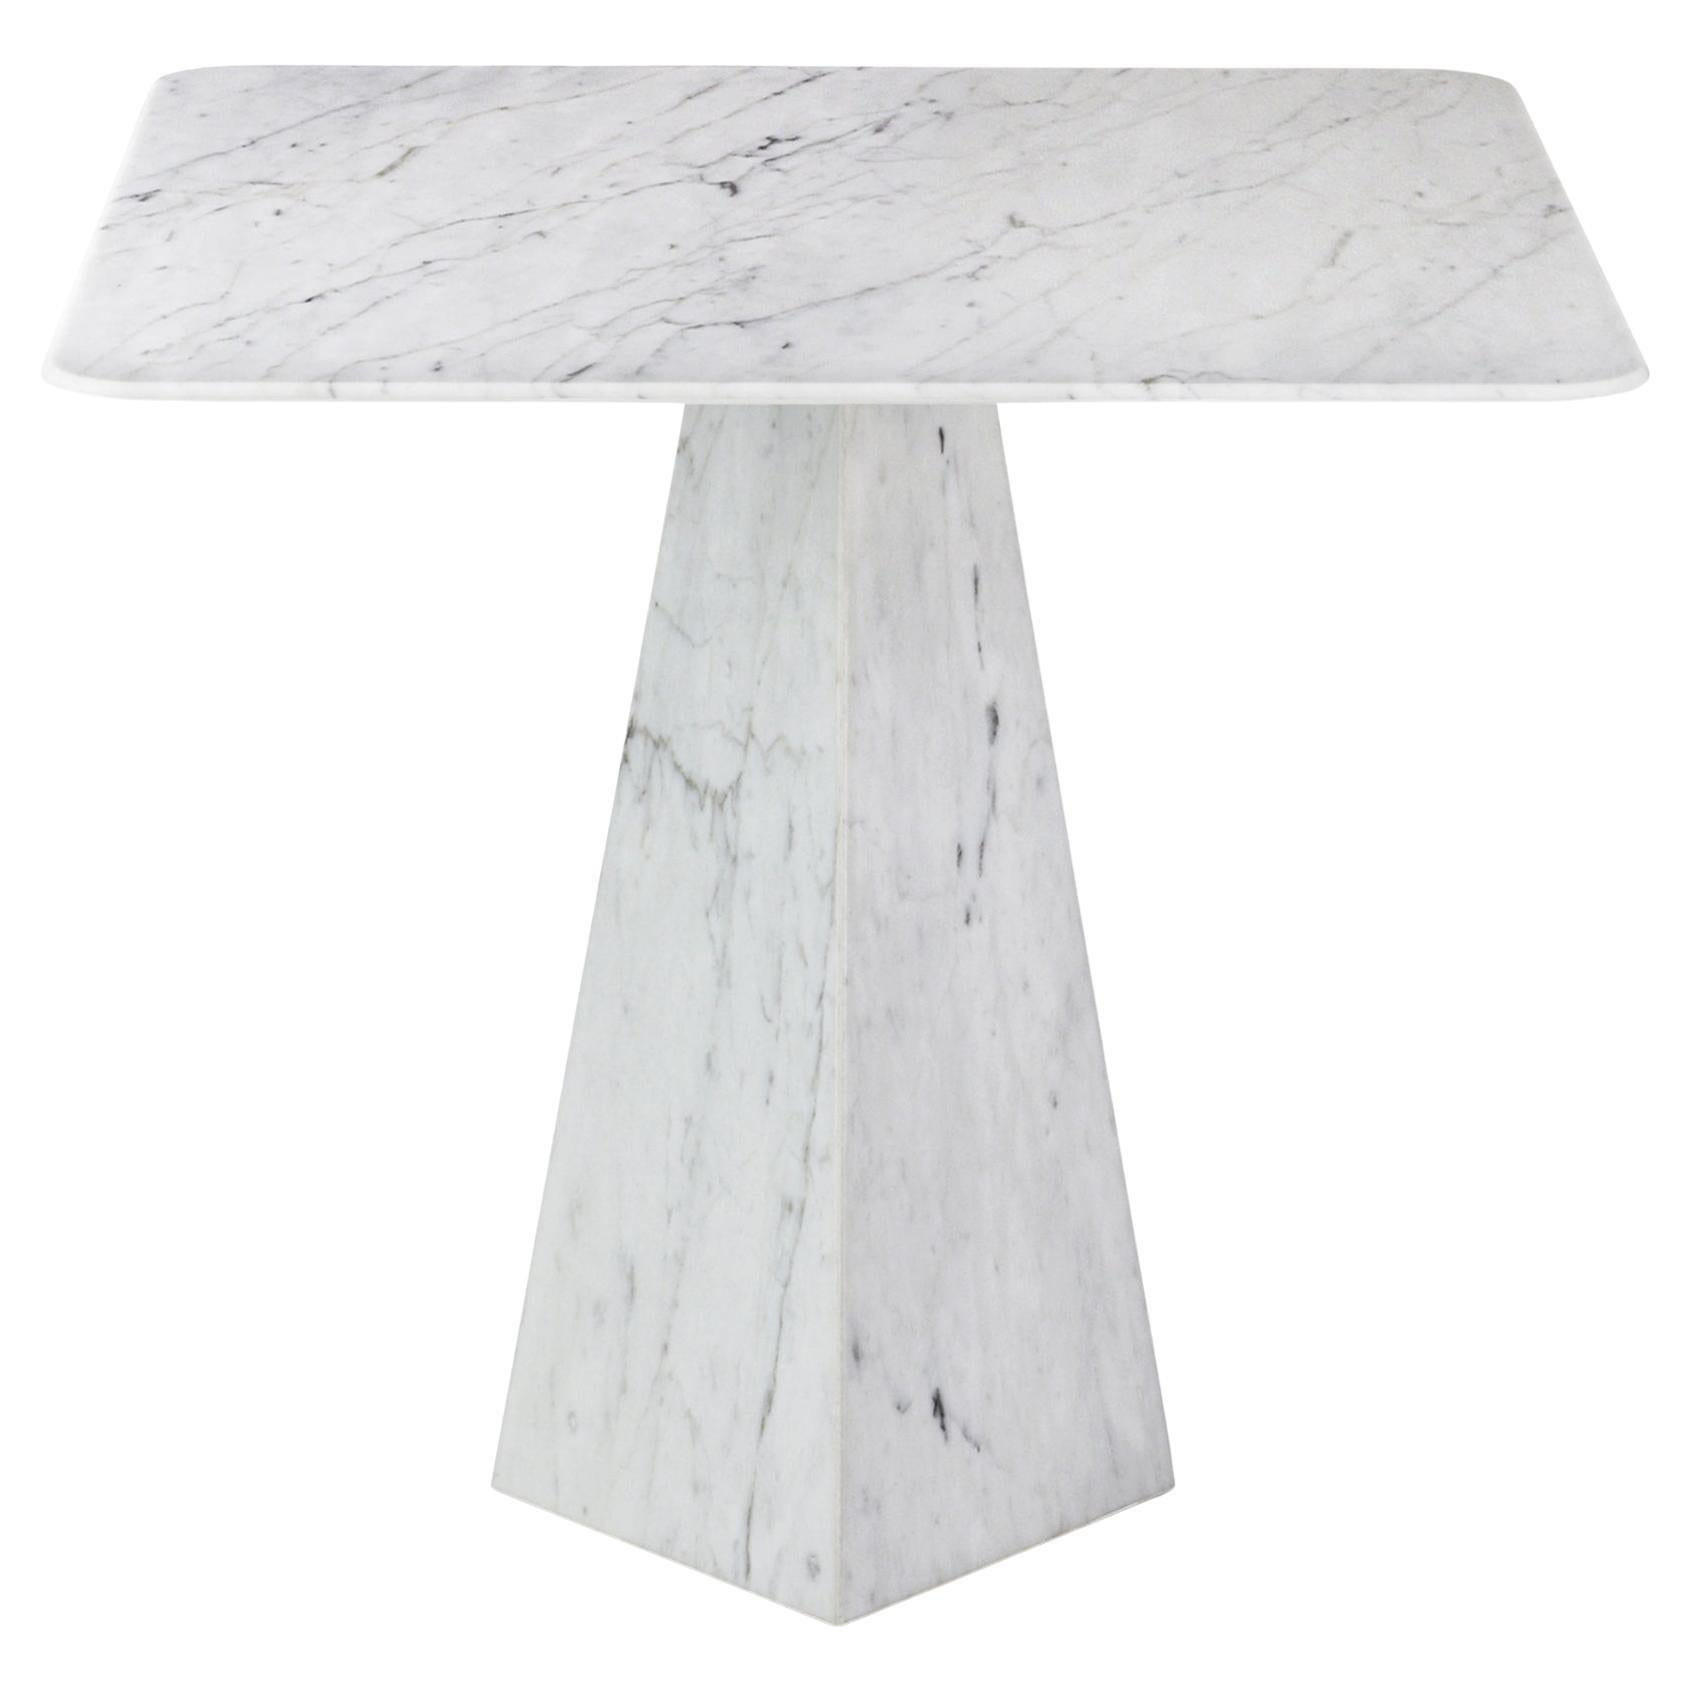 Pair of Ultra Thin White Carrara Marble Square Sidetables